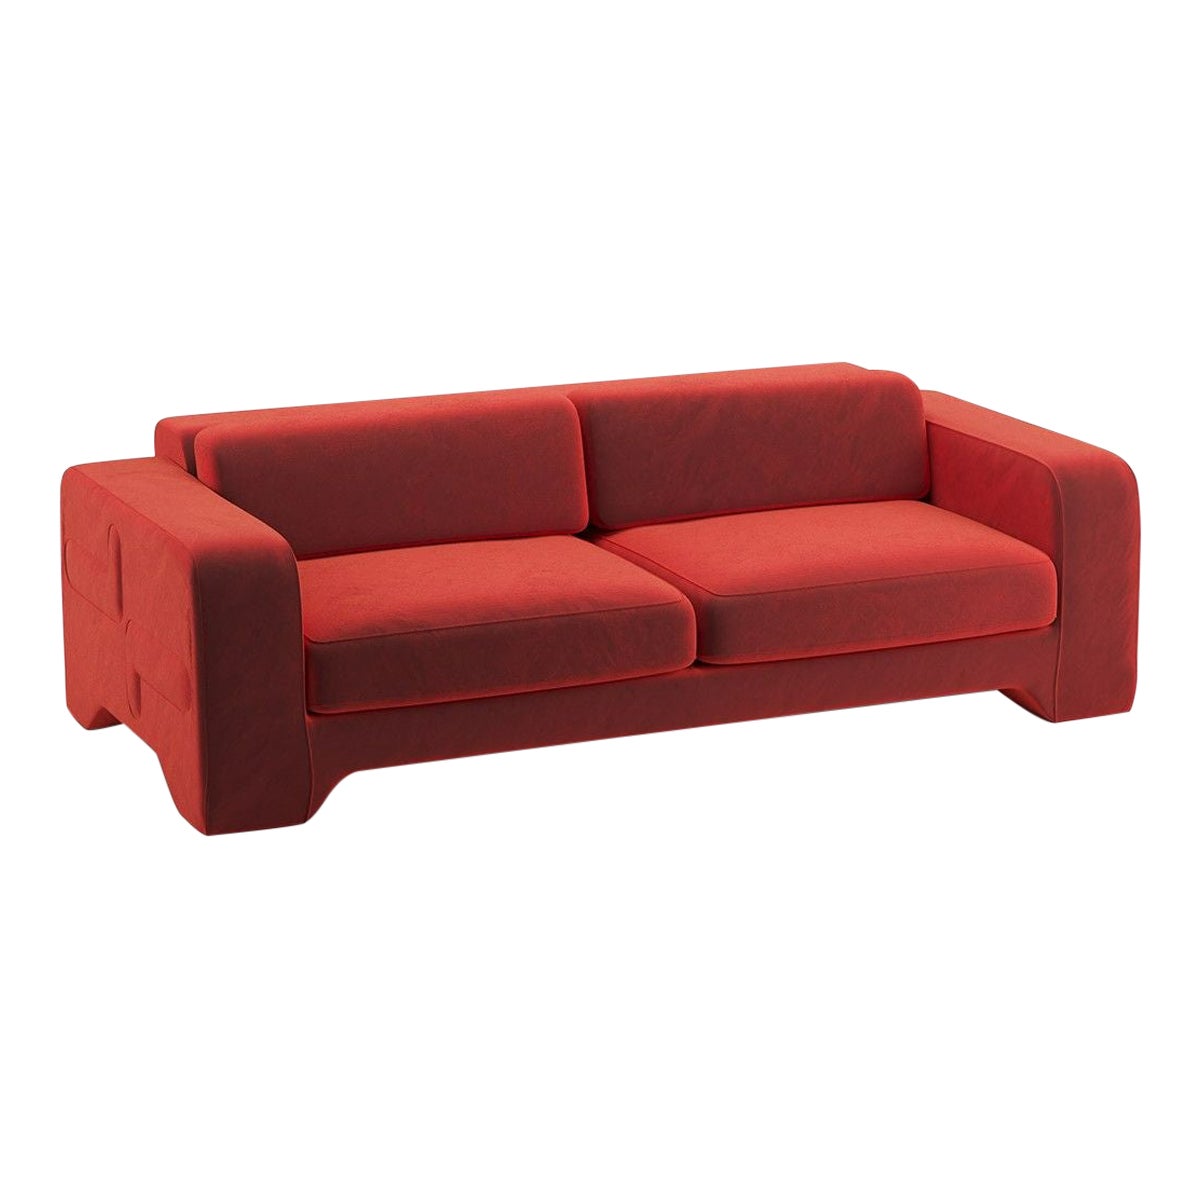 Popus Editions Giovanna 4 Seater Sofa in Vermilion Como Velvet Upholstery